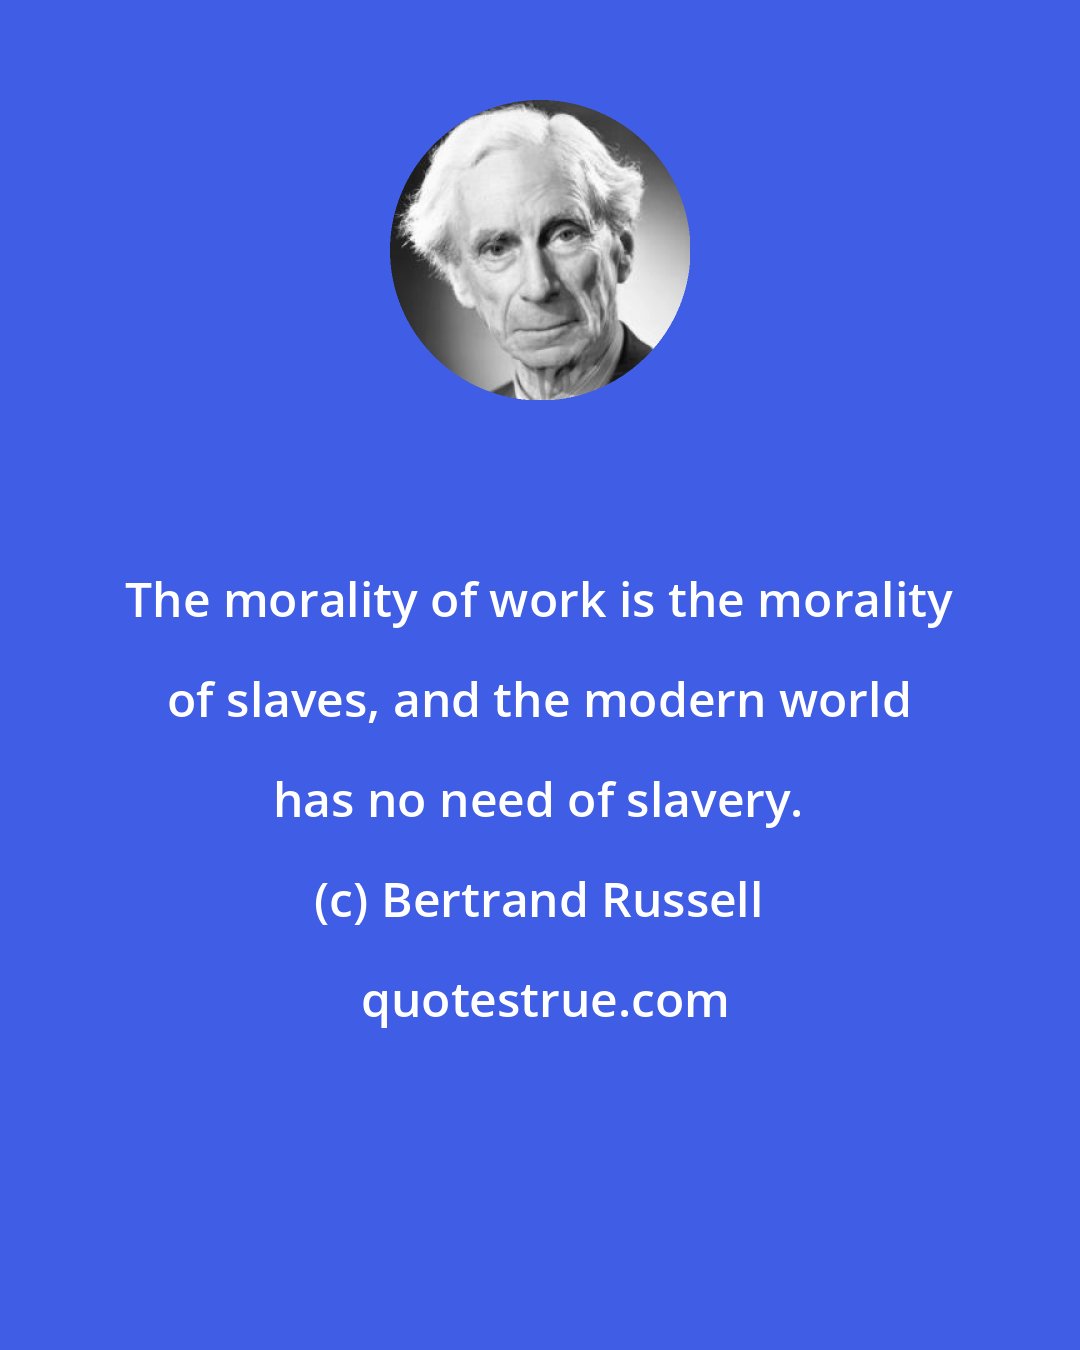 Bertrand Russell: The morality of work is the morality of slaves, and the modern world has no need of slavery.